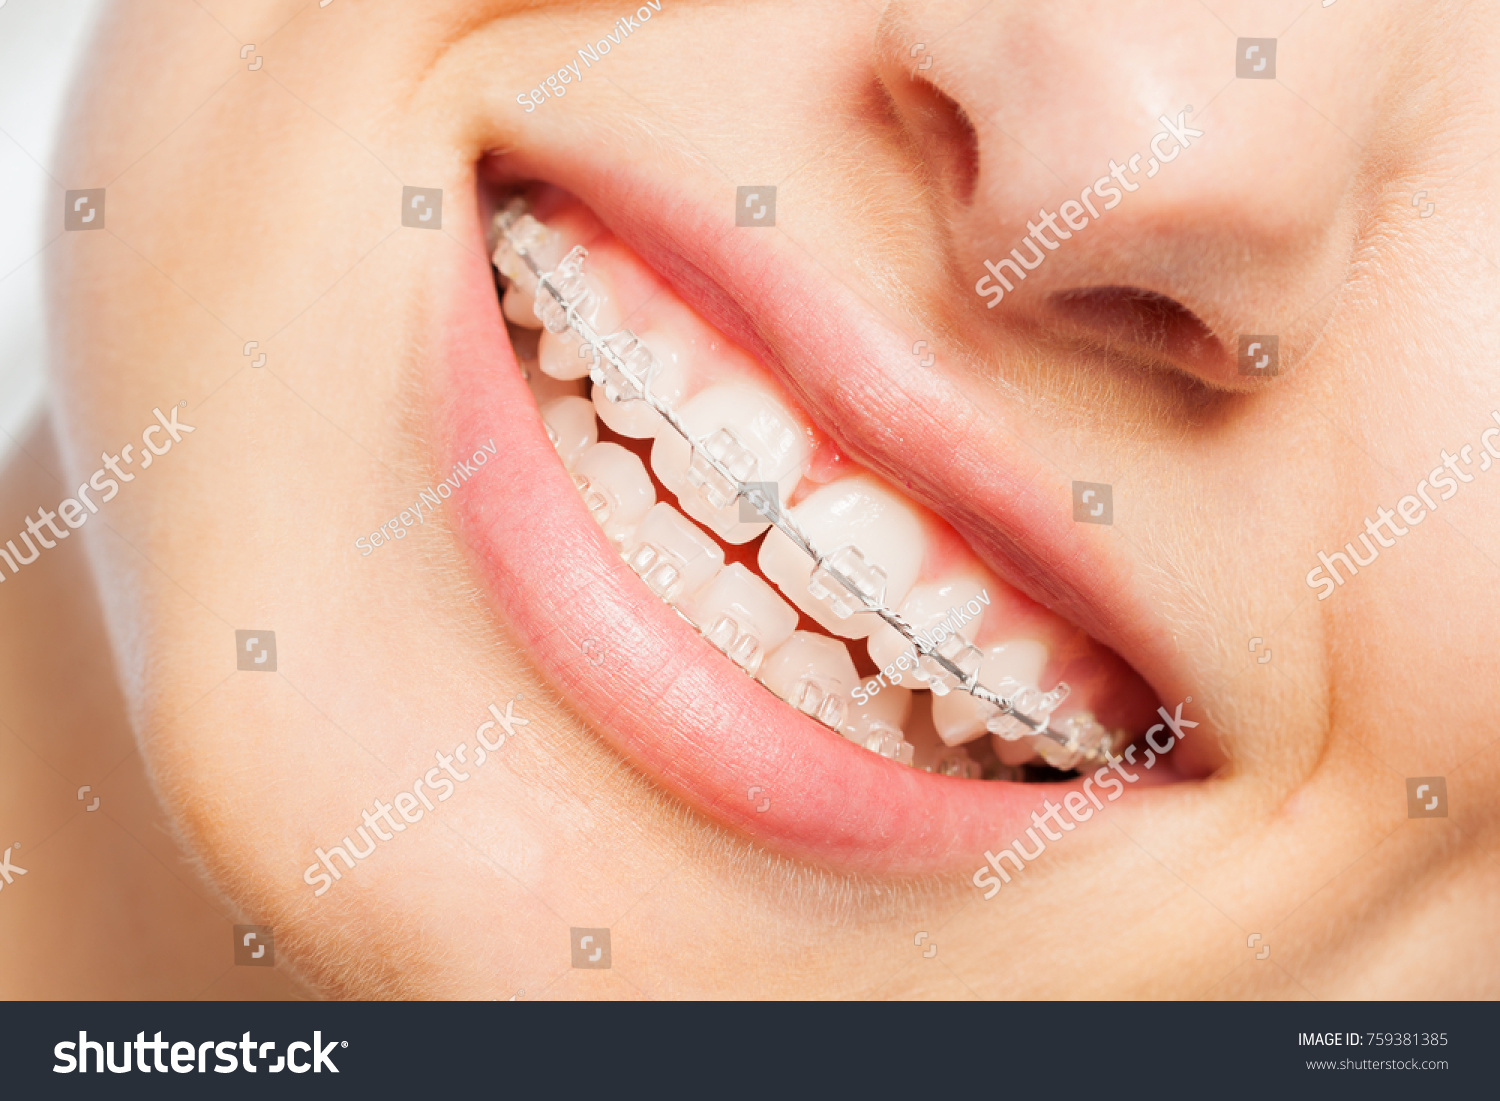 Happy smile of young woman with dental braces #759381385